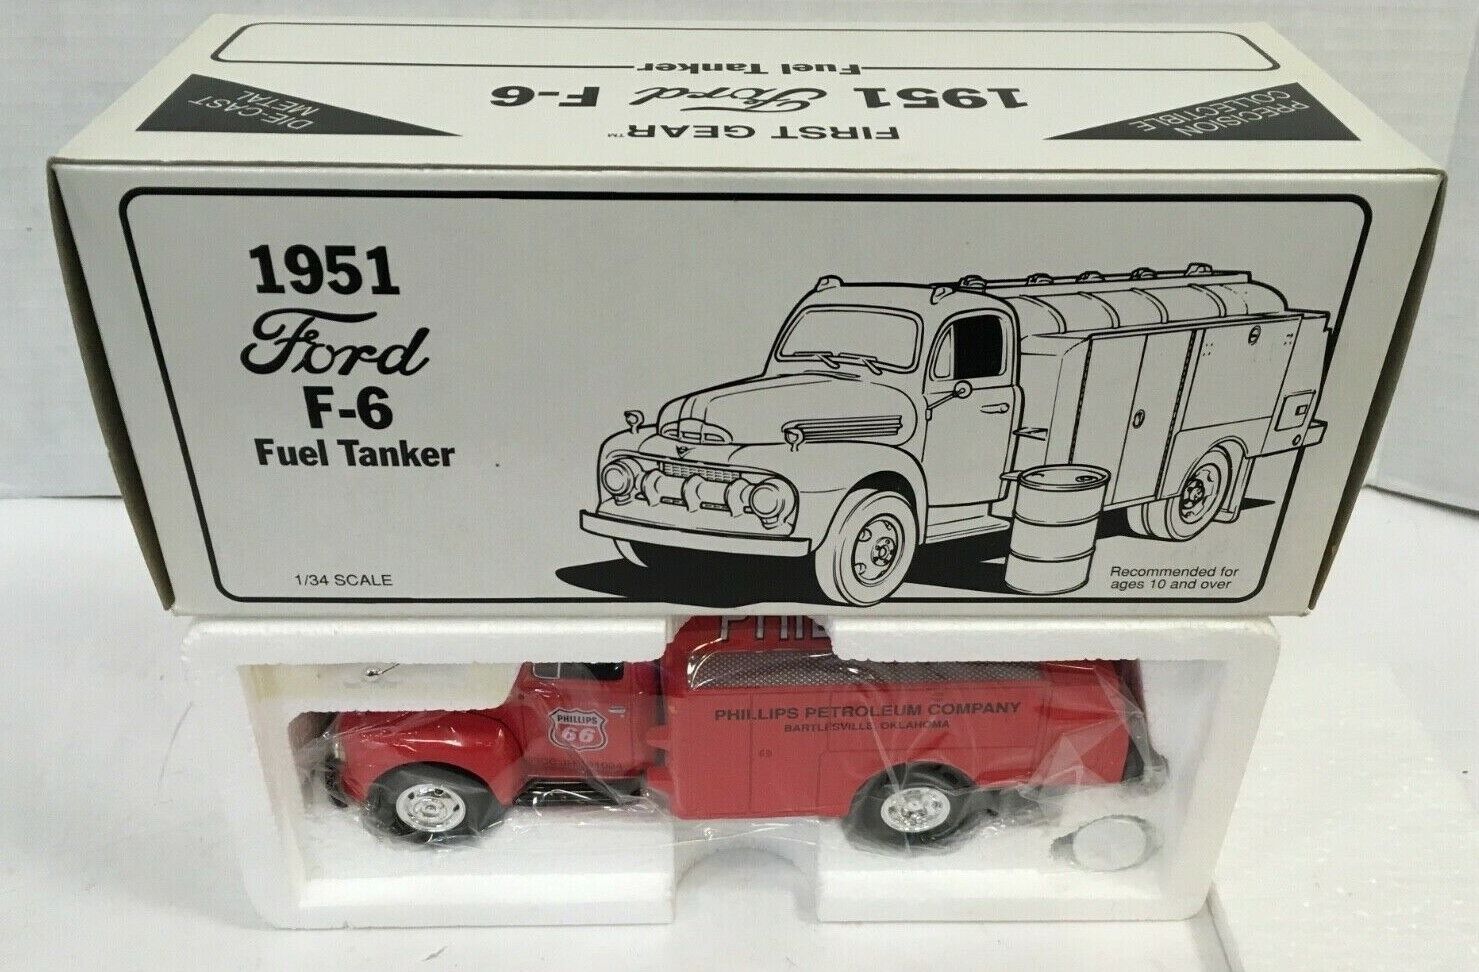 1992 FIRST GEAR 1951 FORD F-6 DRY TOY FUEL TANKER NEW IN BOX 1:34 